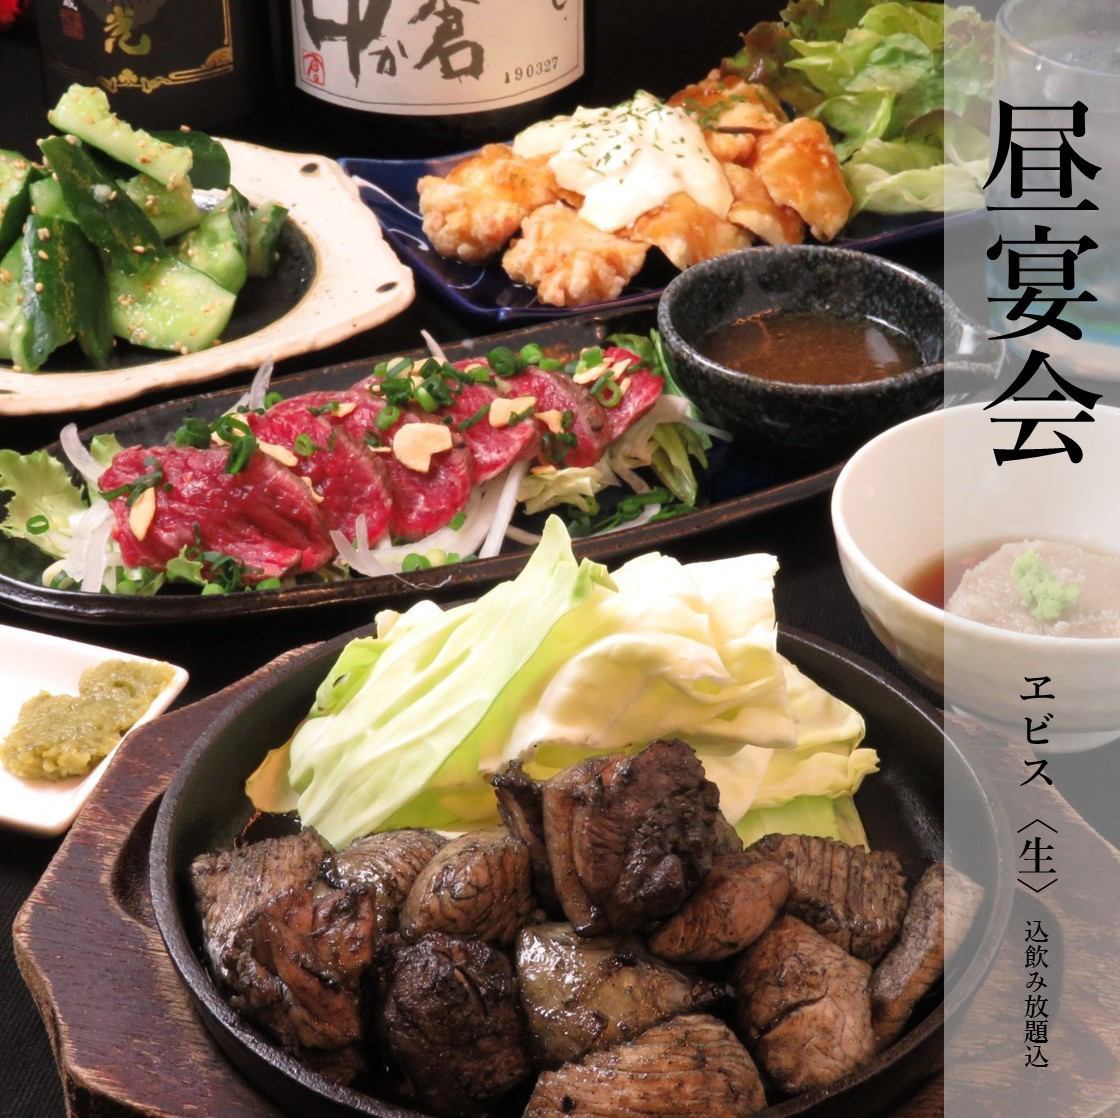 Open from 11:00 ◆ Ebisu all-you-can-drink course starts from 3000 yen, and lunch parties are possible!